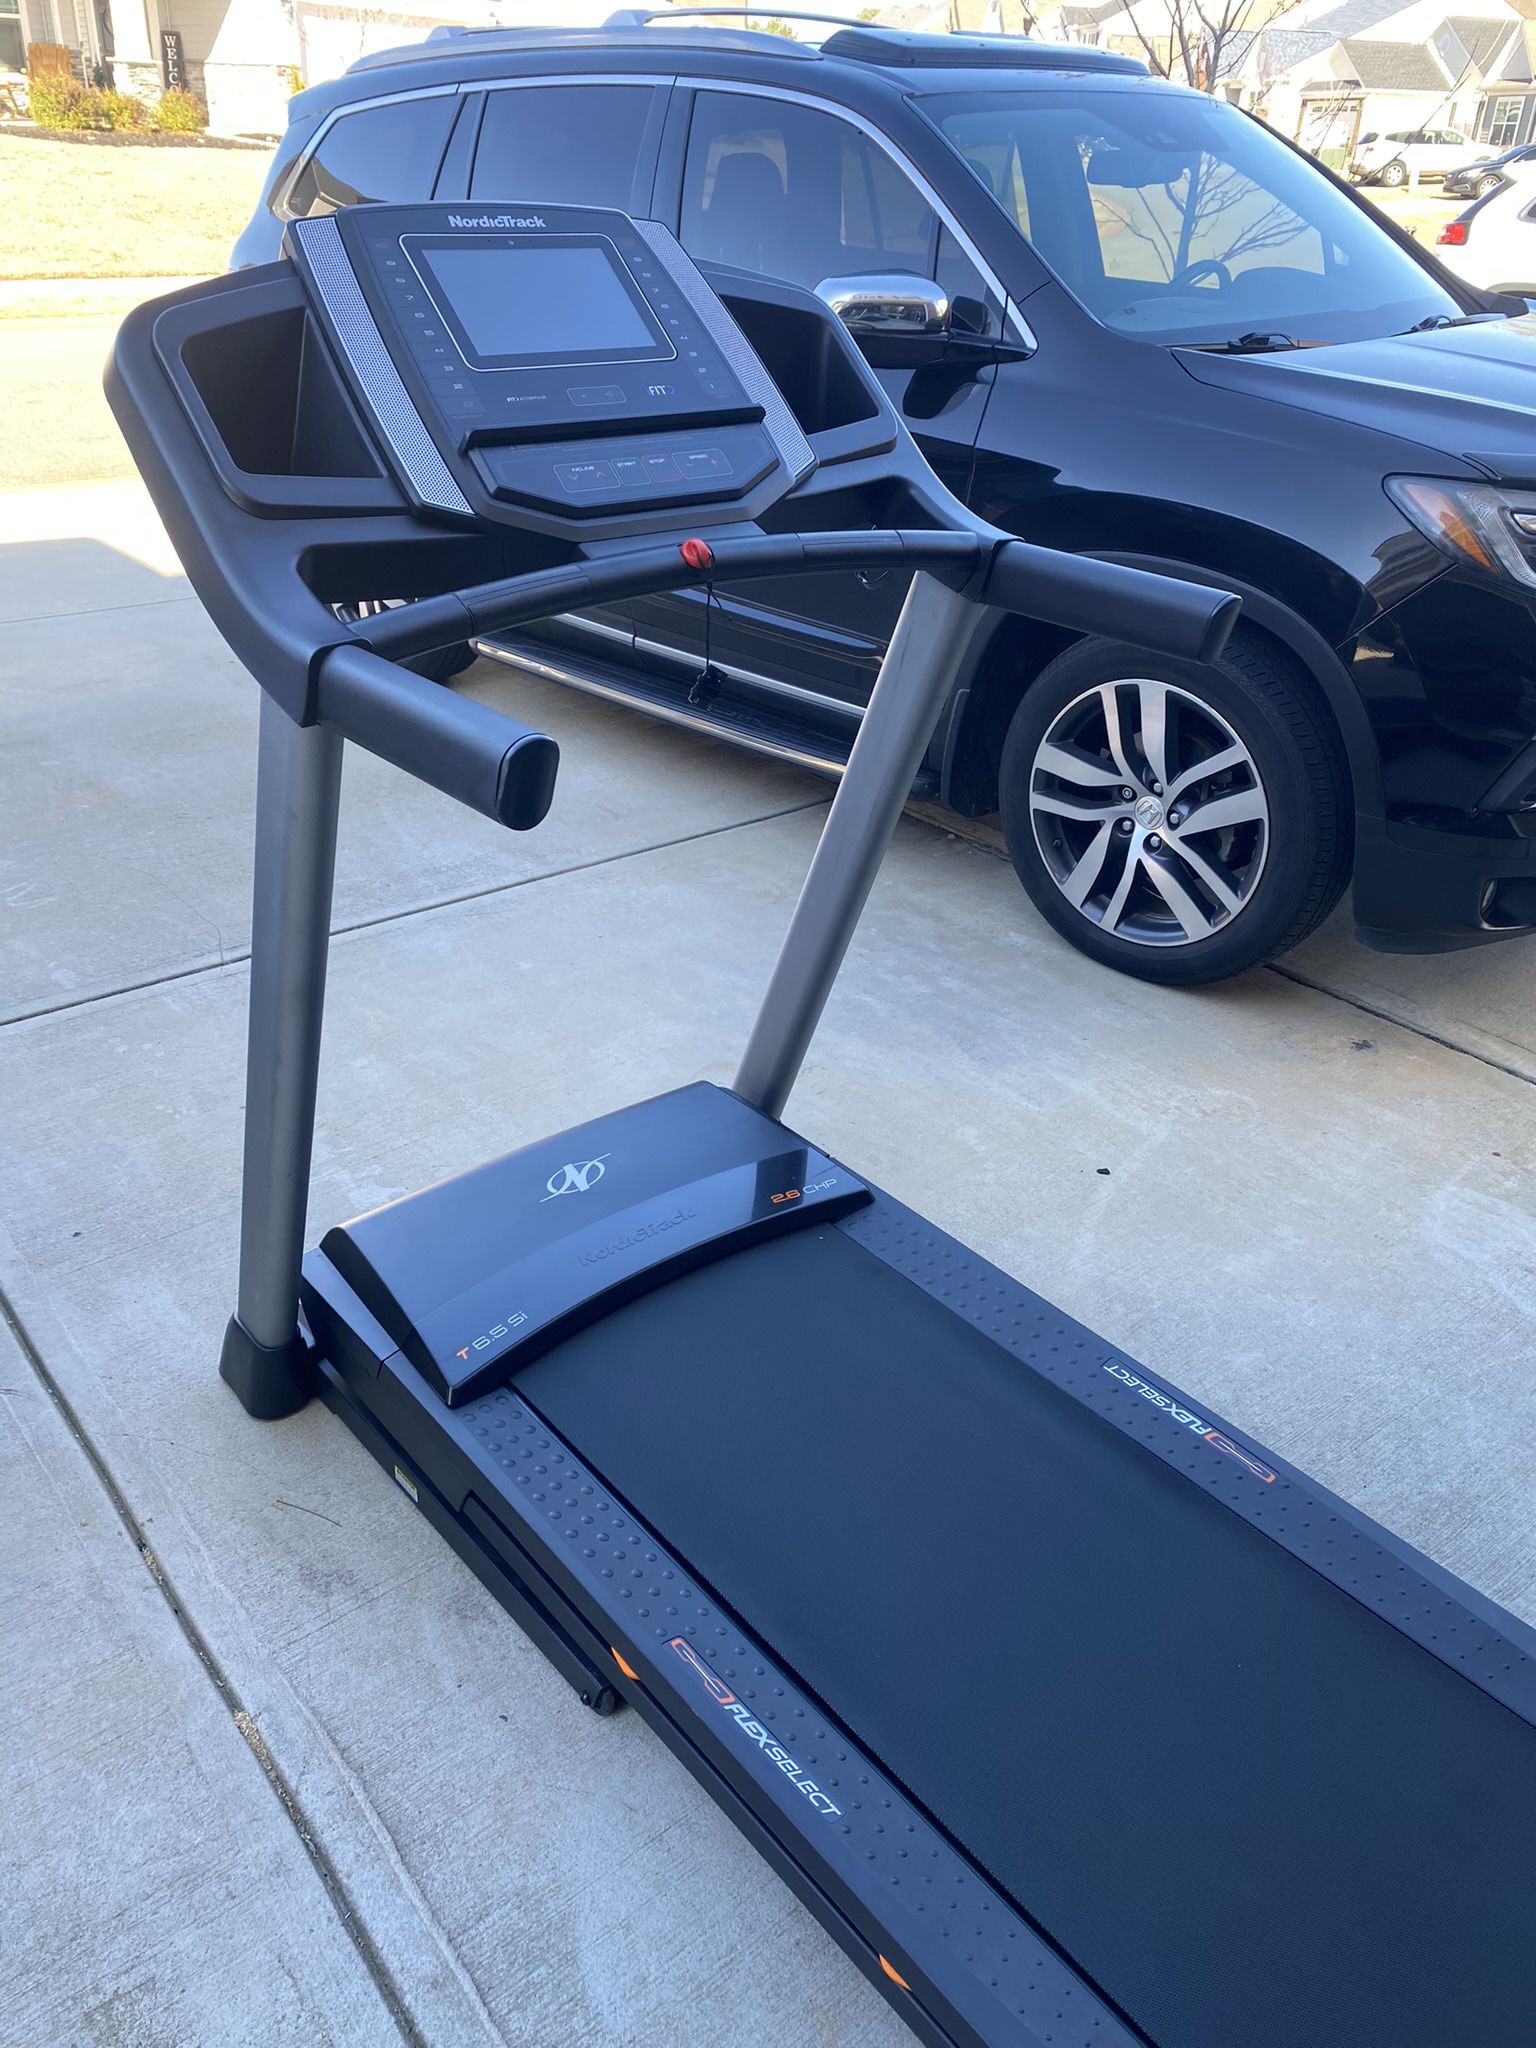 NordictTrack 6.5 Si Treadmill with 10” Touchscreen Like New Assembled